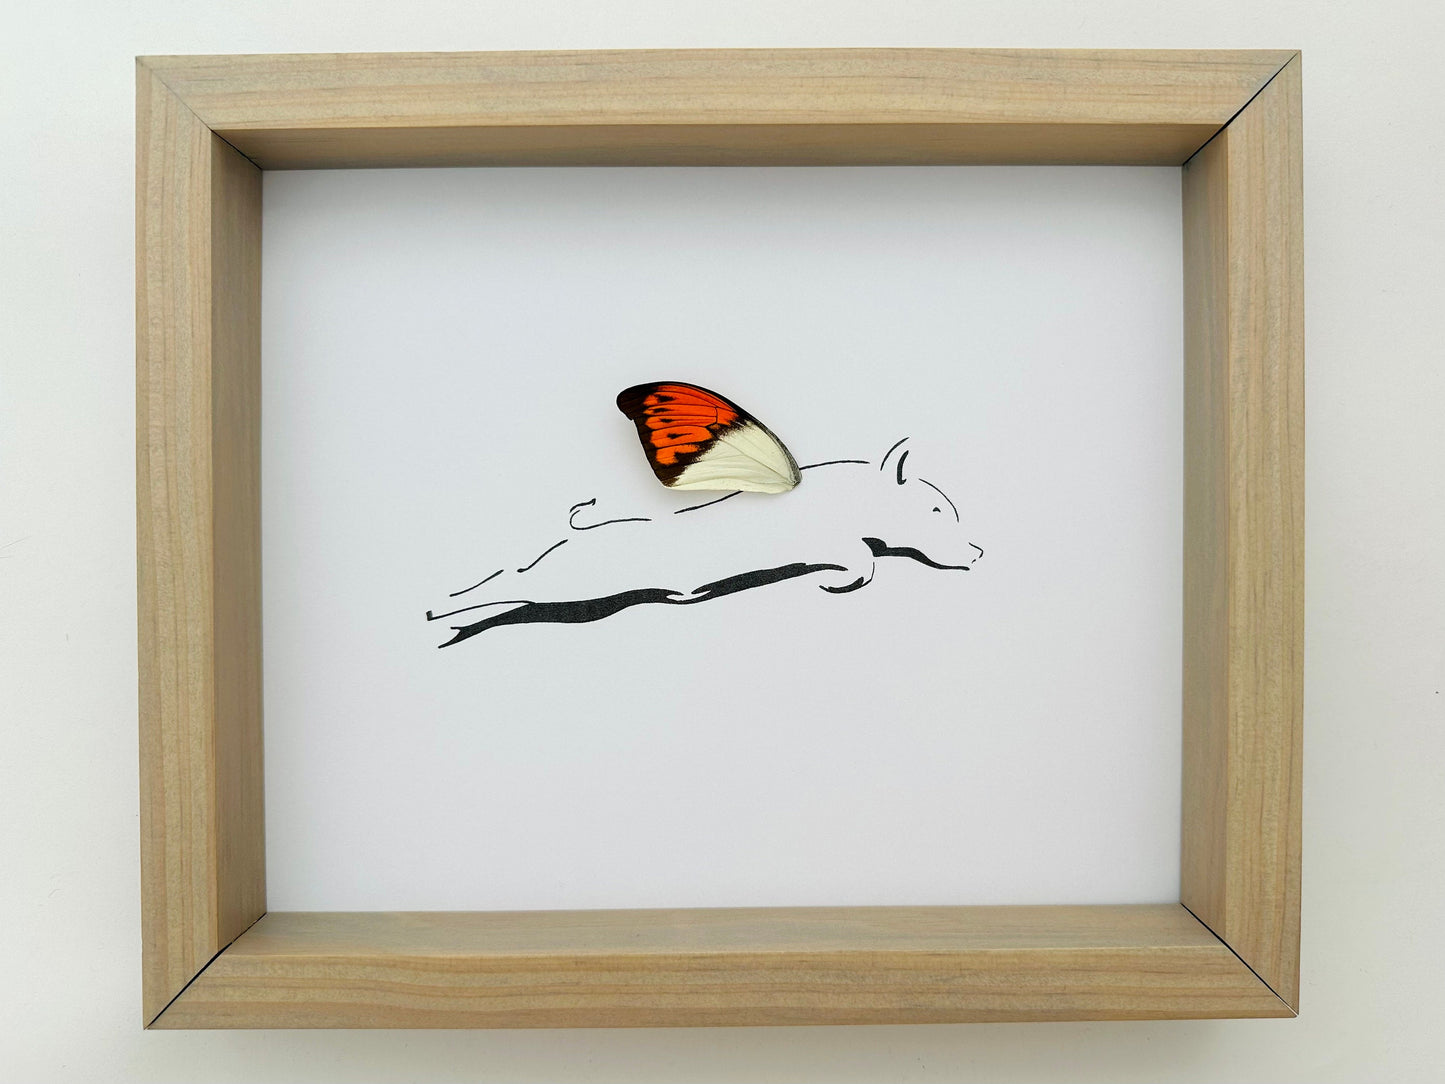 Pigs Fly Flying Pig Real Butterfly Wing Framed Art Ethically Sourced Made in MN - Holly Ulm - Isms Butterfly Conservation Art